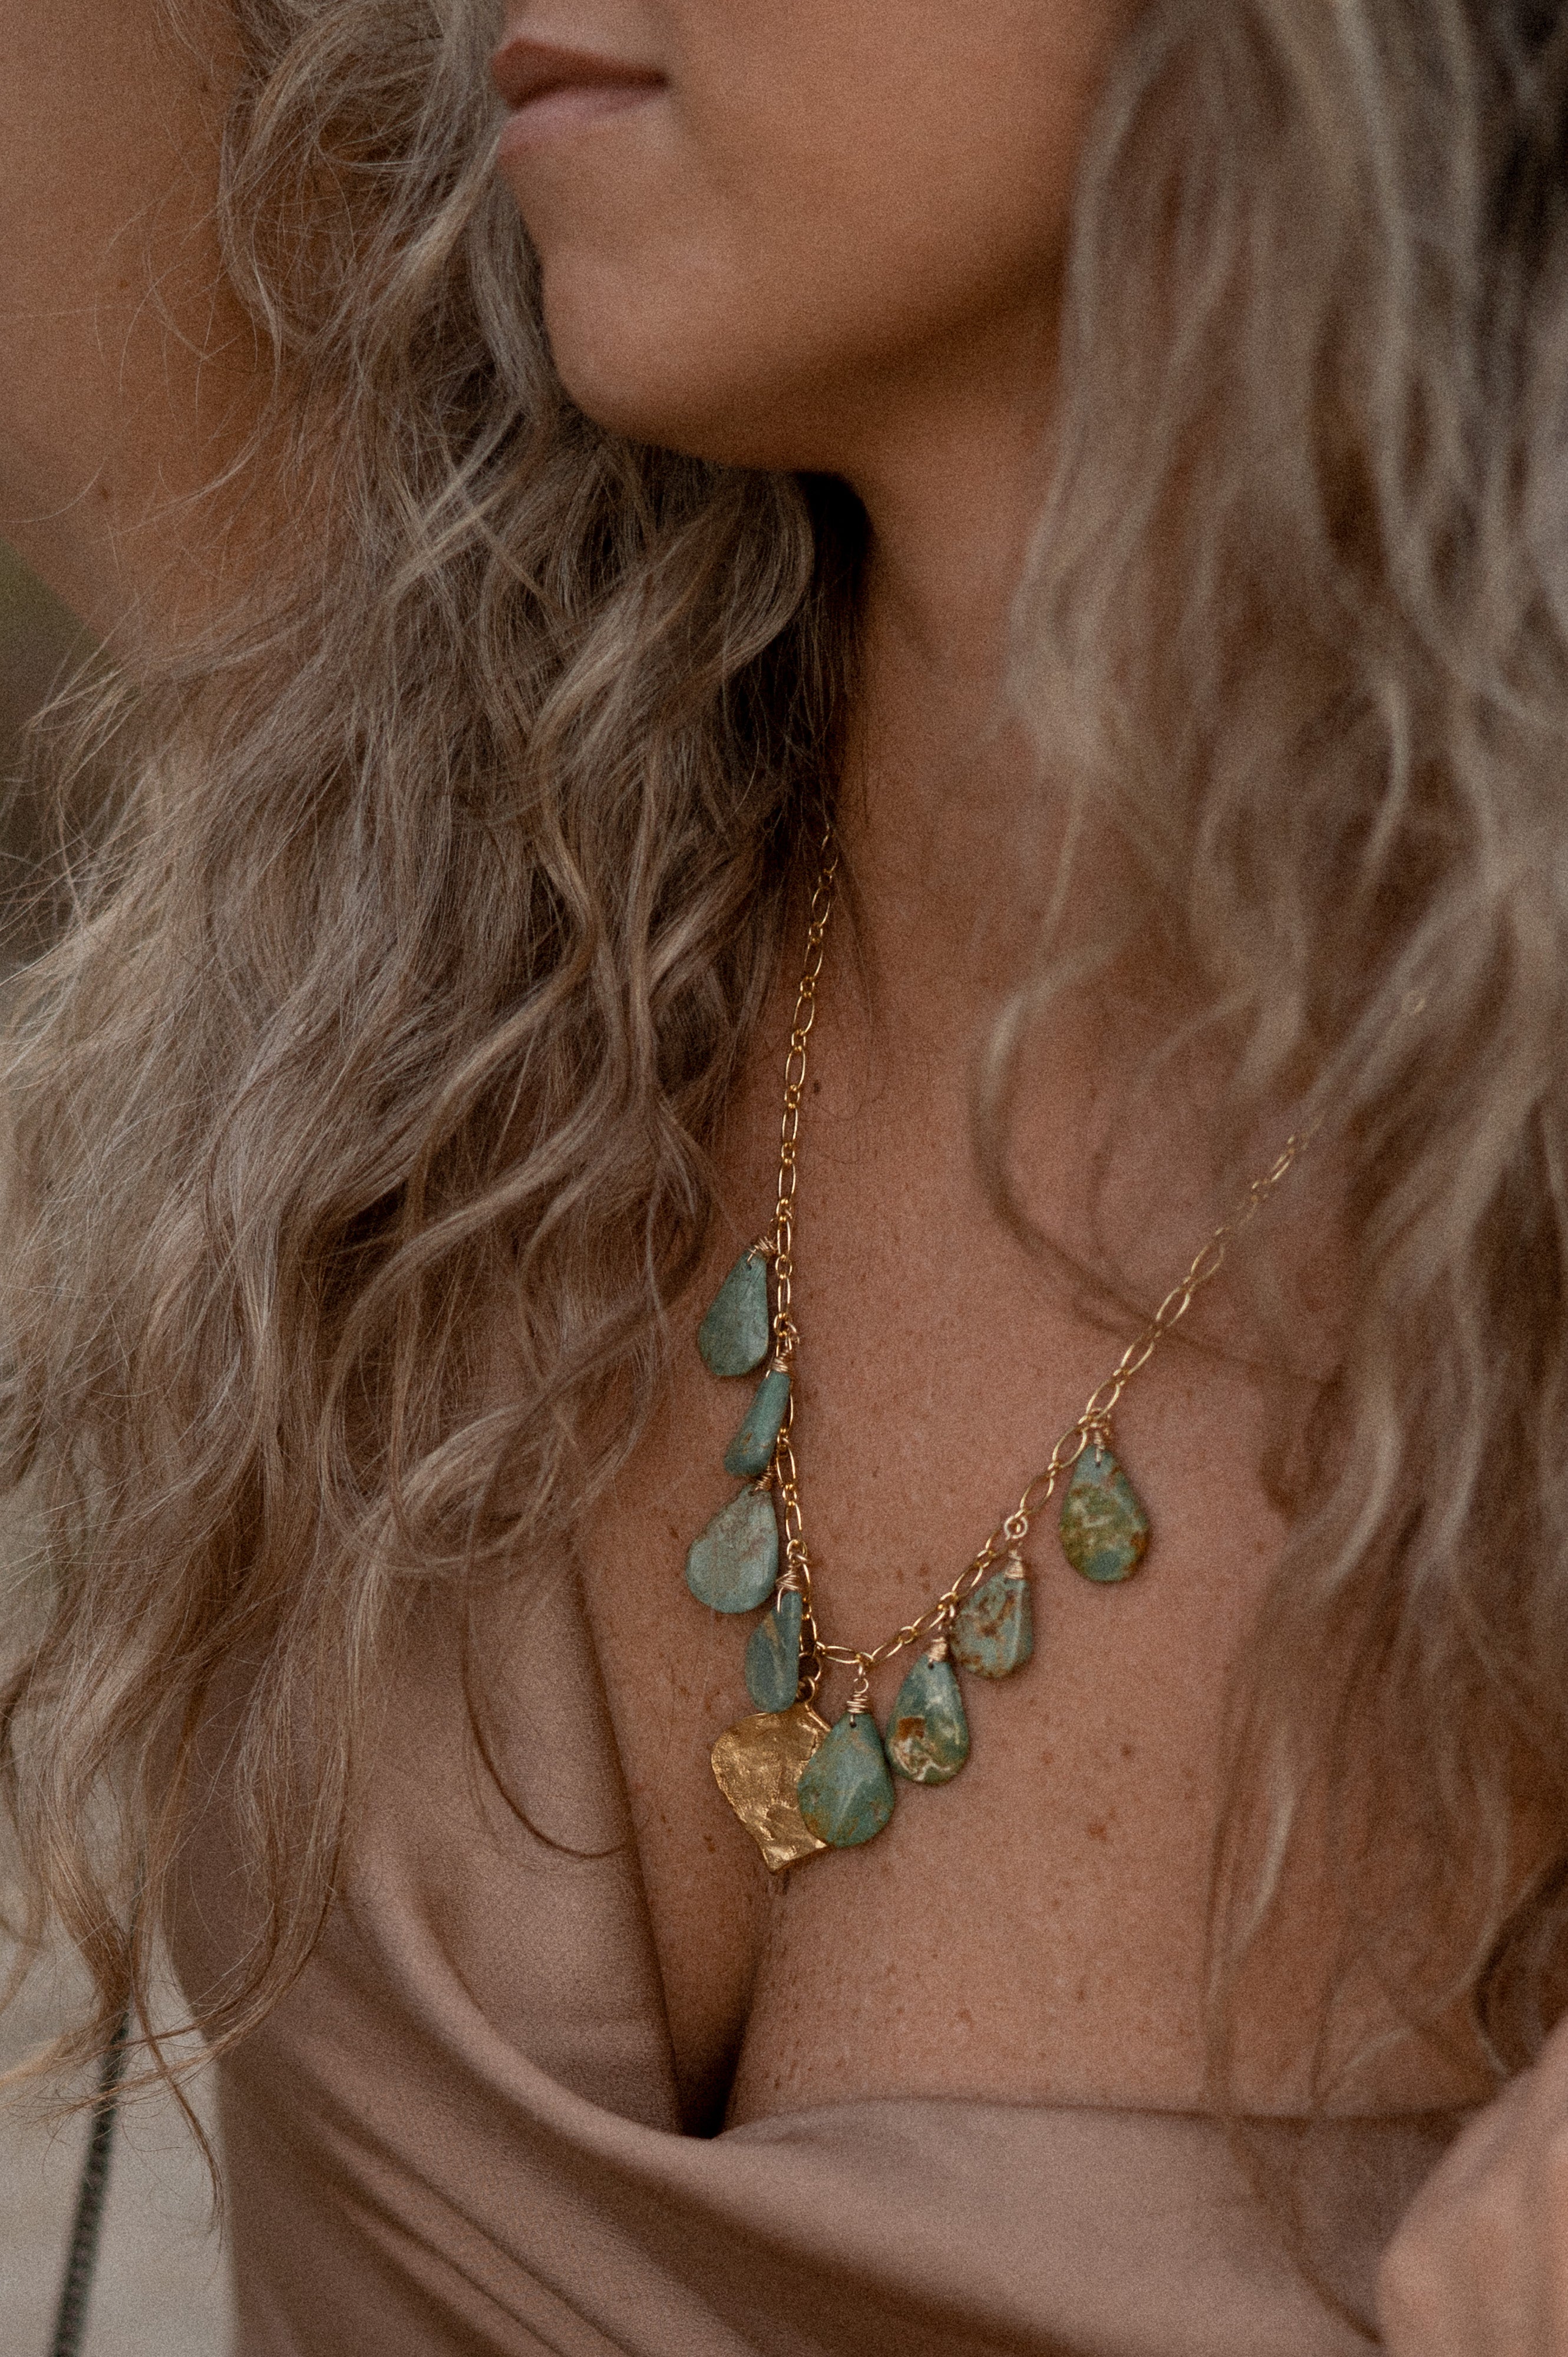 The Quaking Aspen Turquoise Necklace